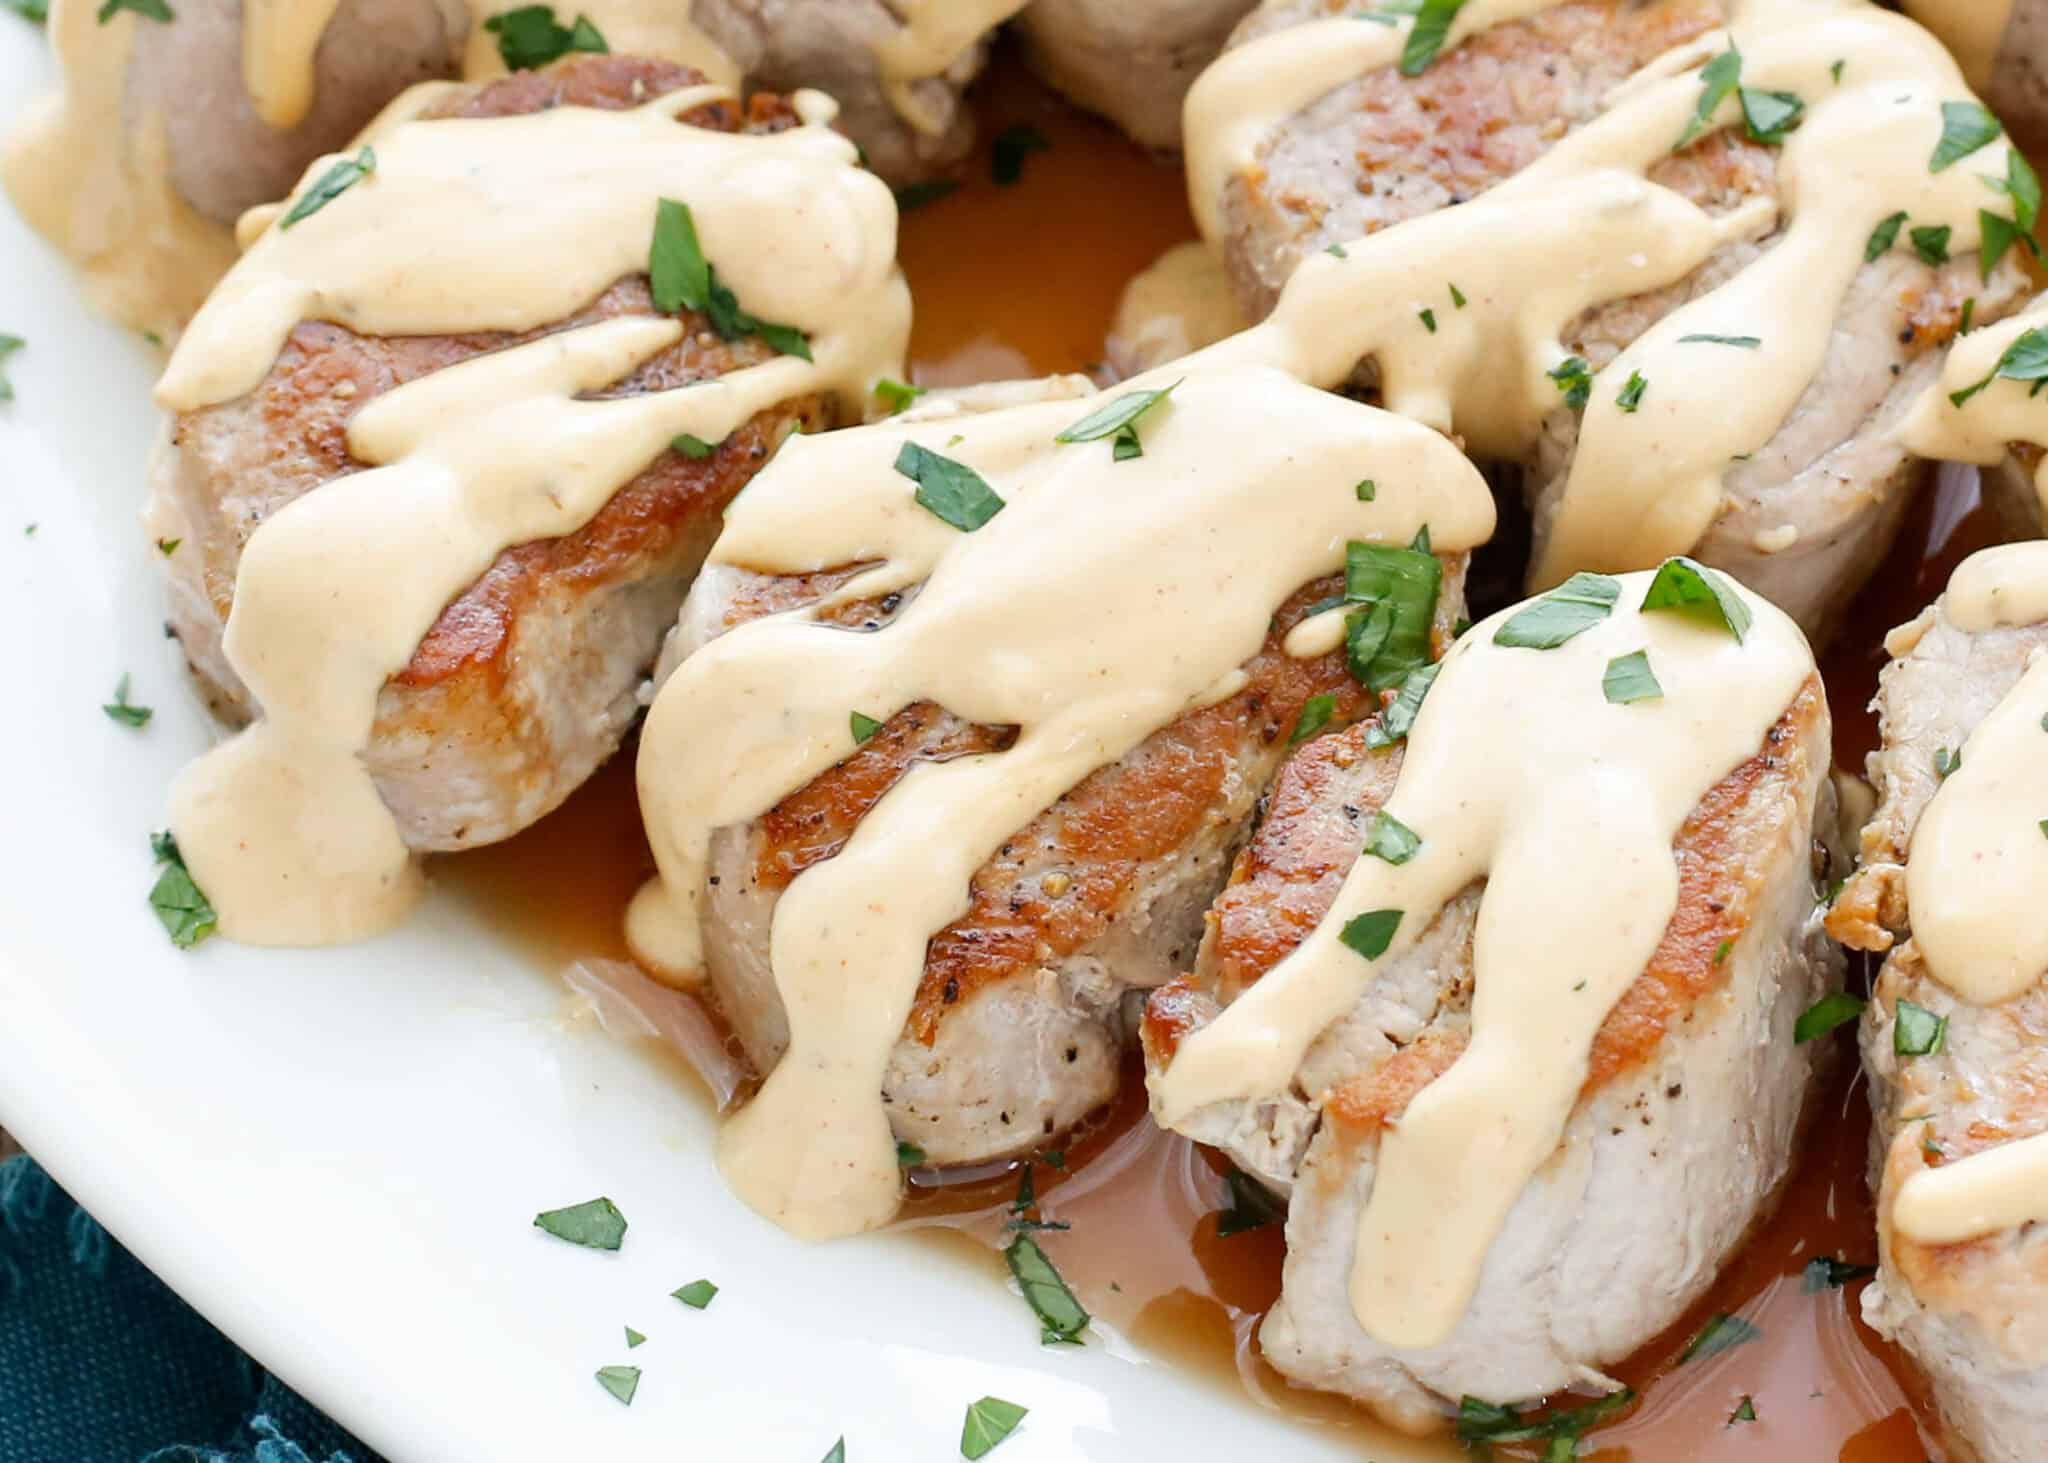 Pan Fried Pork Medallions in a Creamy Wine Sauce are a 25 minute minute dinner that you're going to love! get the recipe at barefeetinthekitchen.com